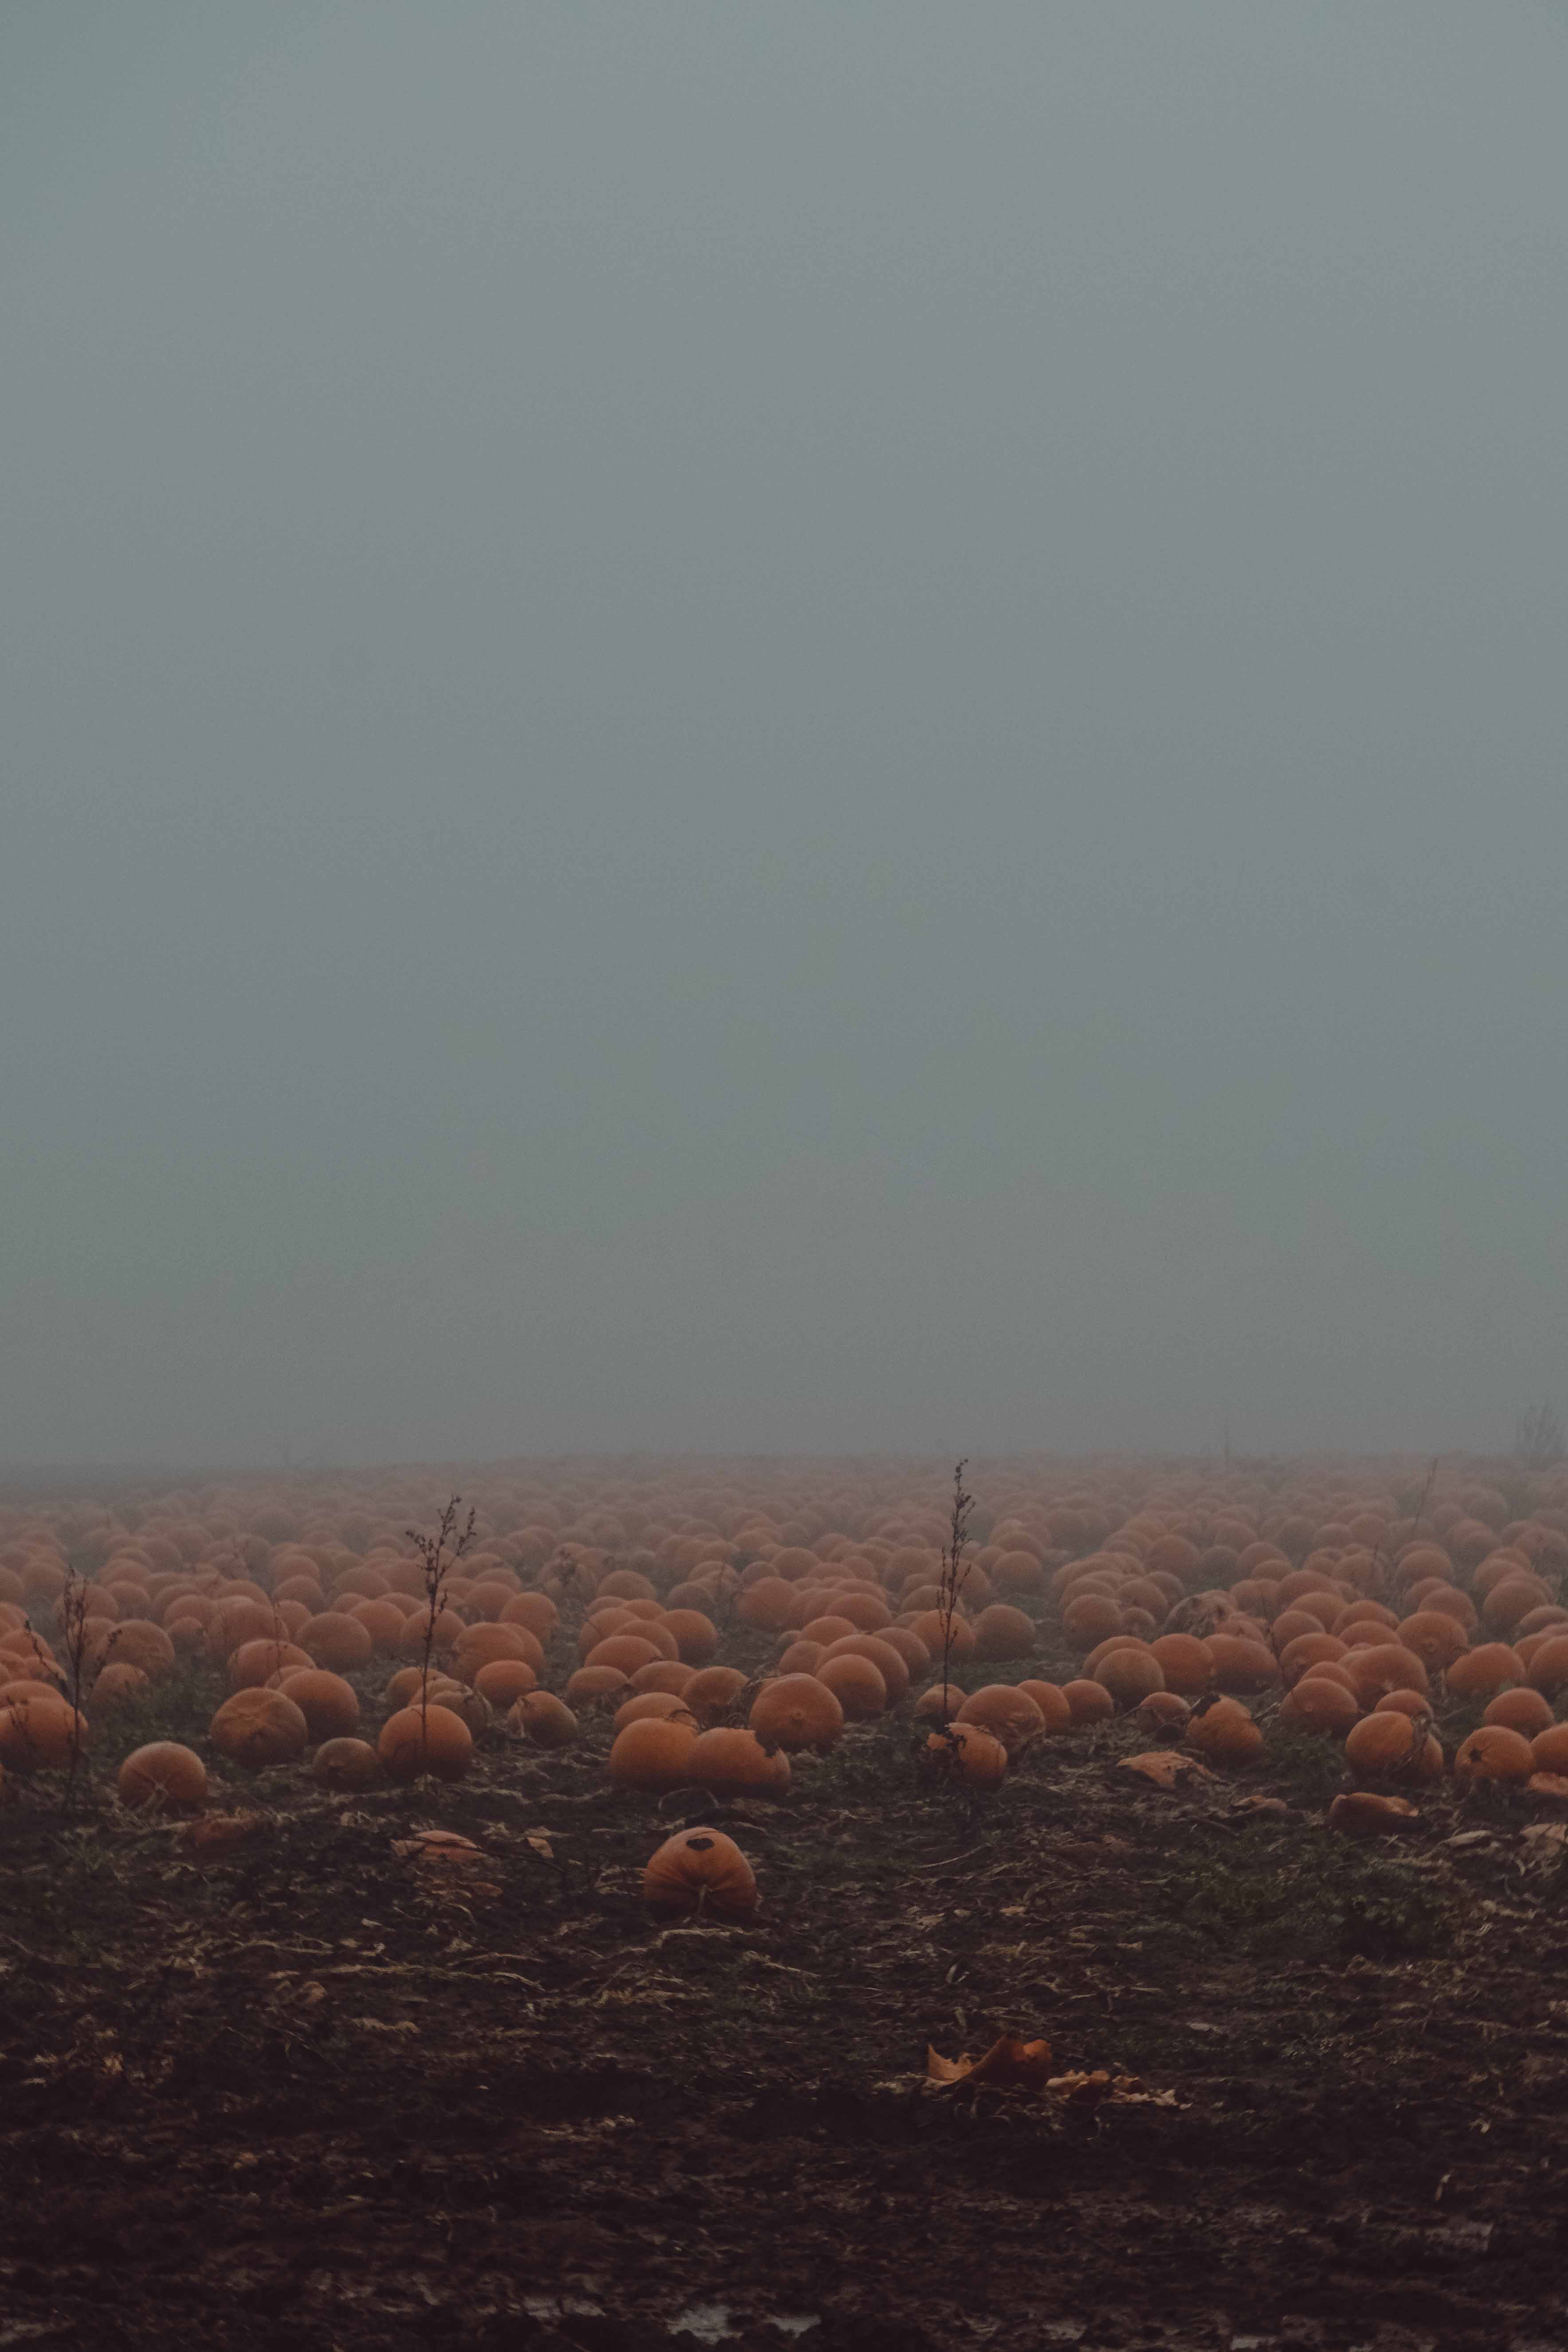 An atmospheric pumpkin patch shrouded in mist in the Cotswolds